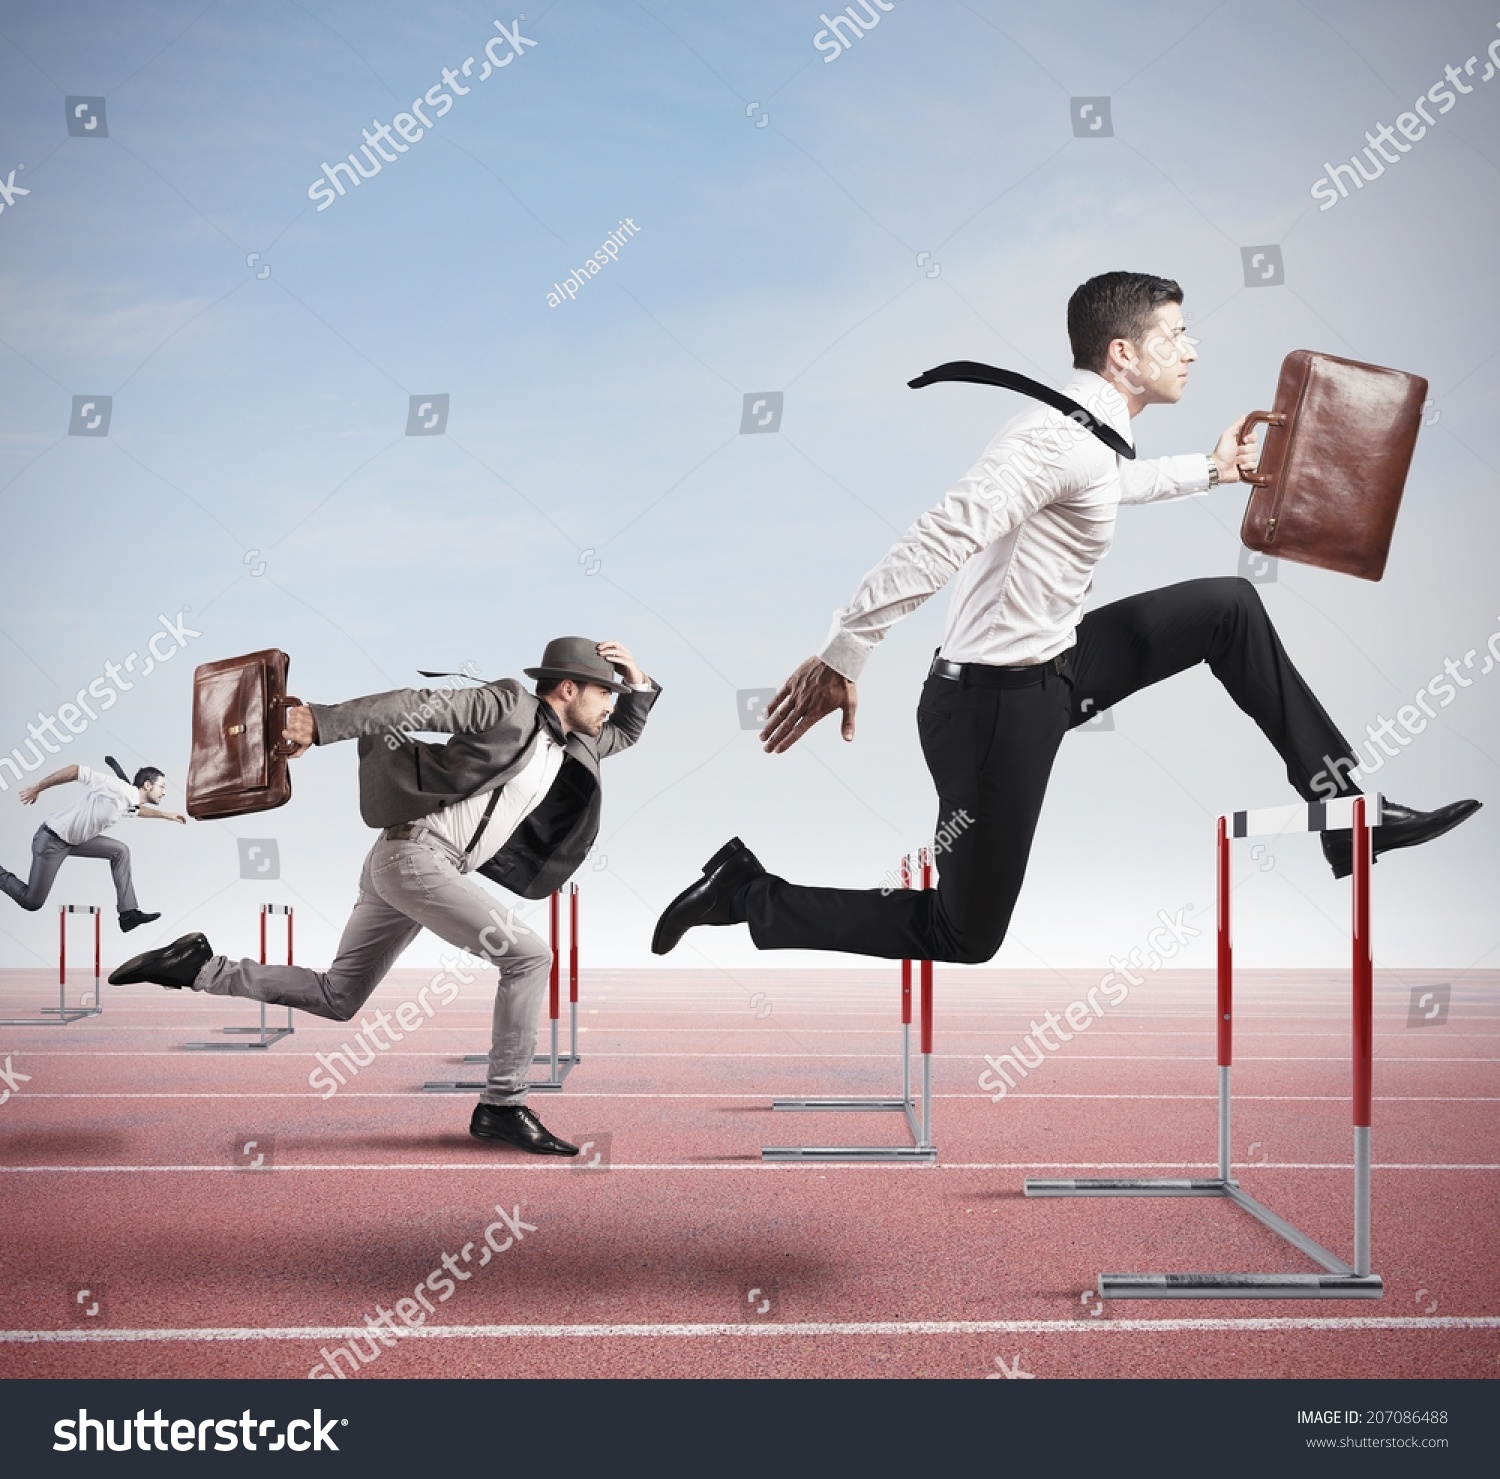 Business competition with jumping businessman over obstacle #207086488